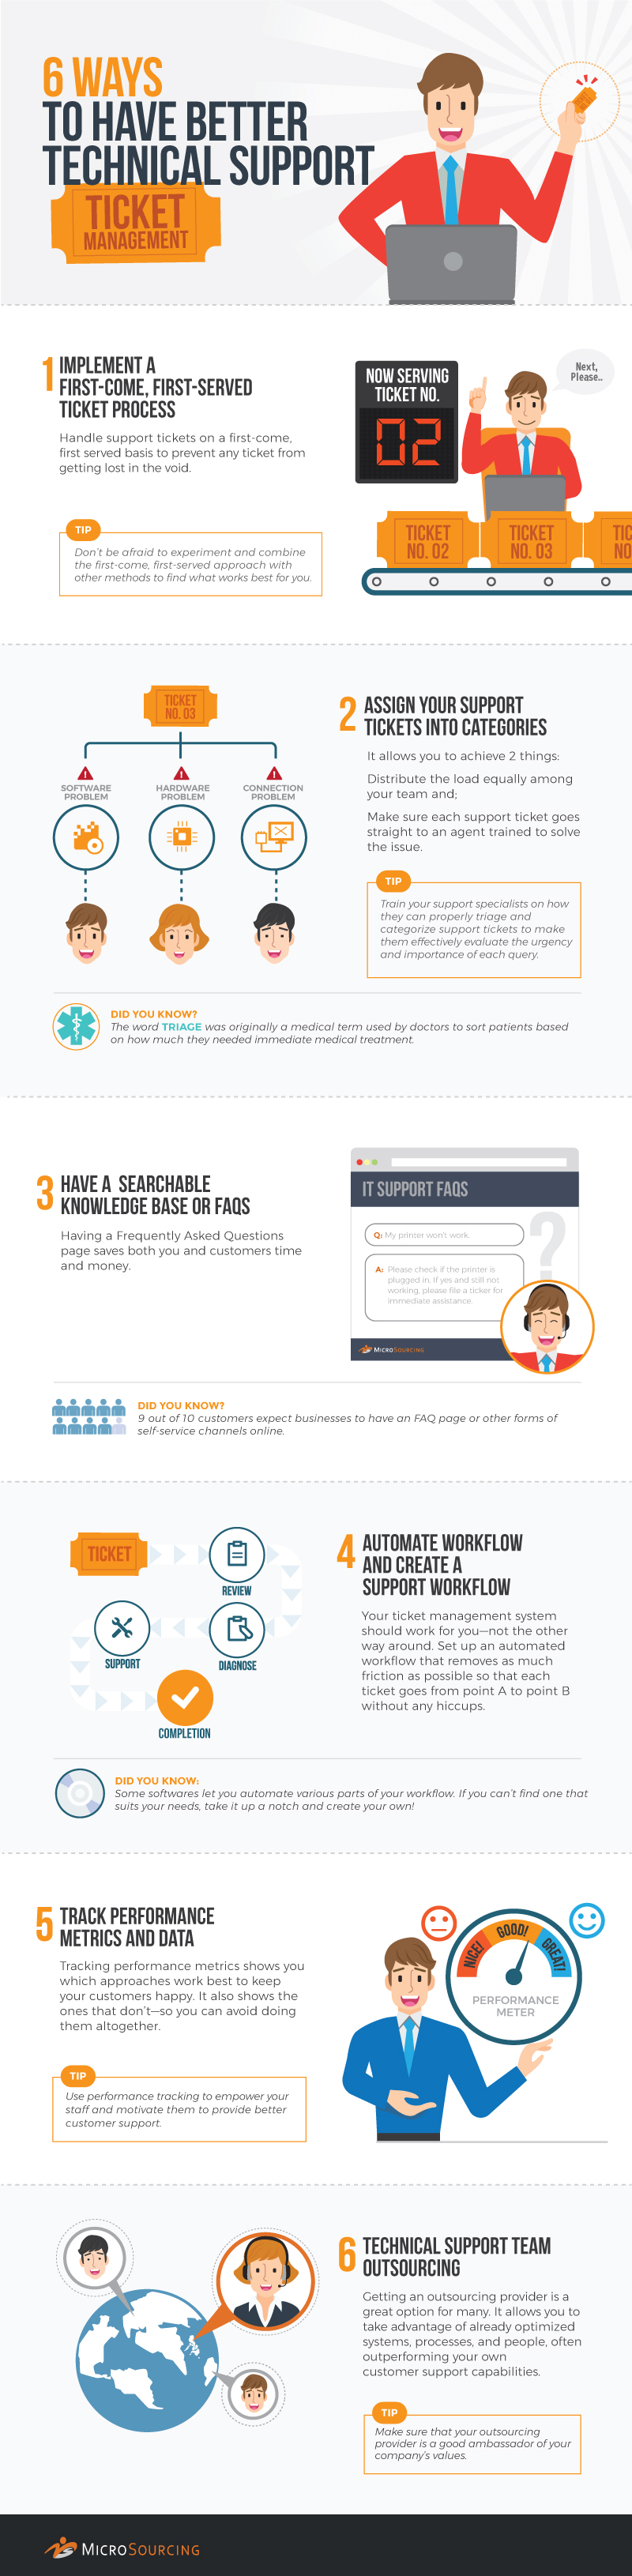 Technical Support infographic